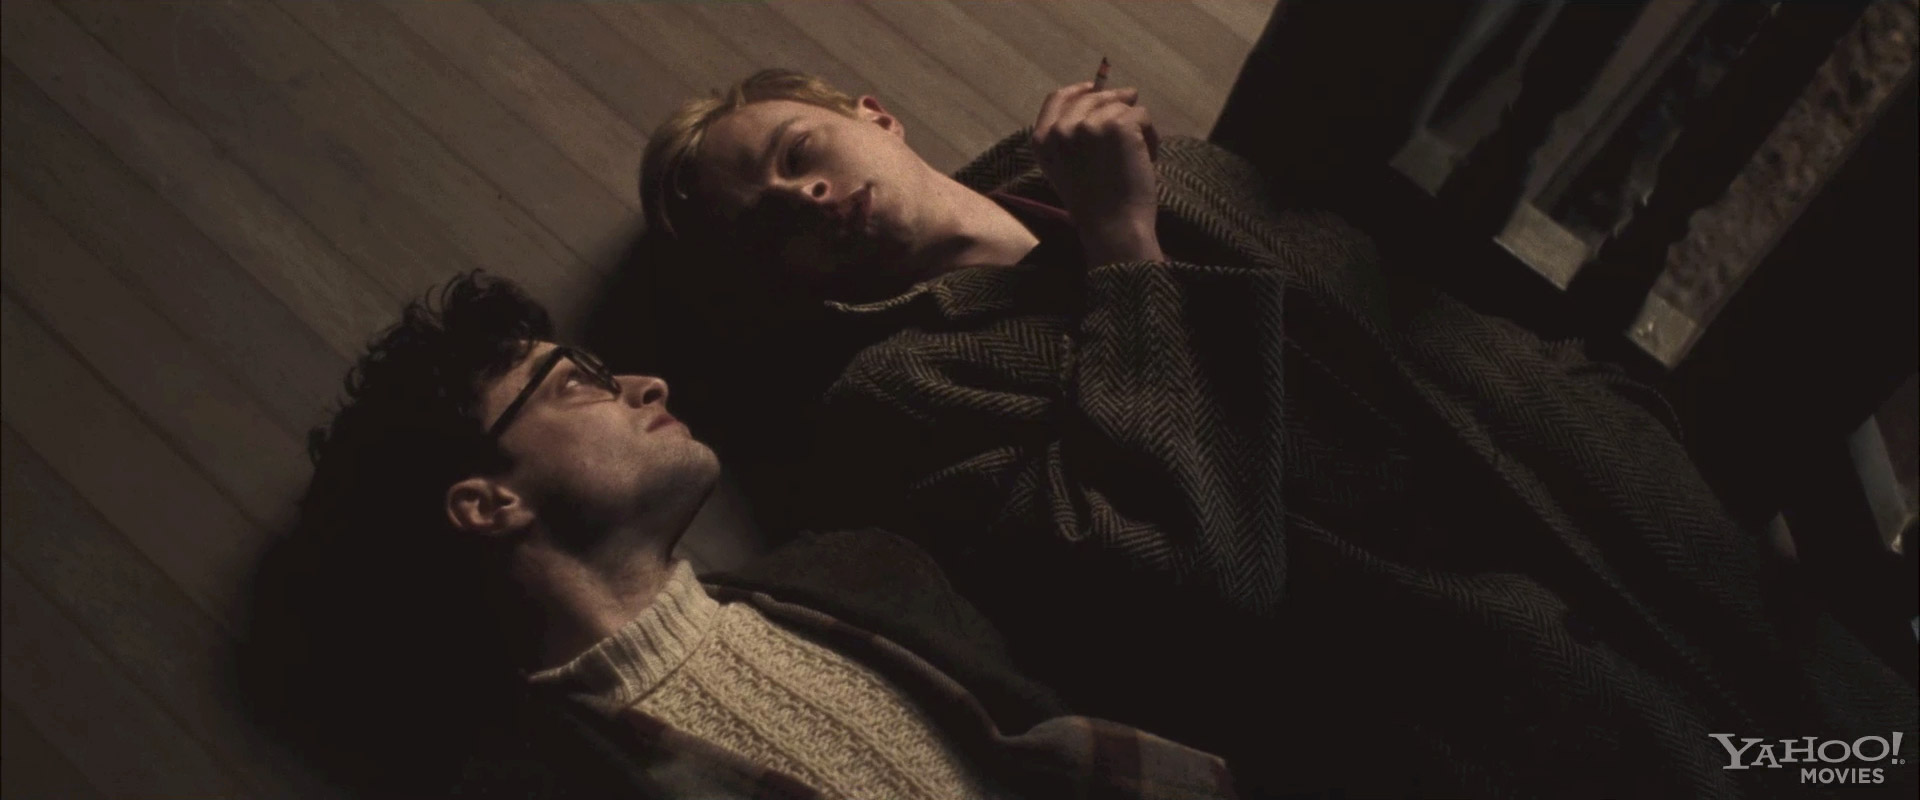 trailer-for-kill-your-darlings-with-daniel-radcliffe-02.jpg